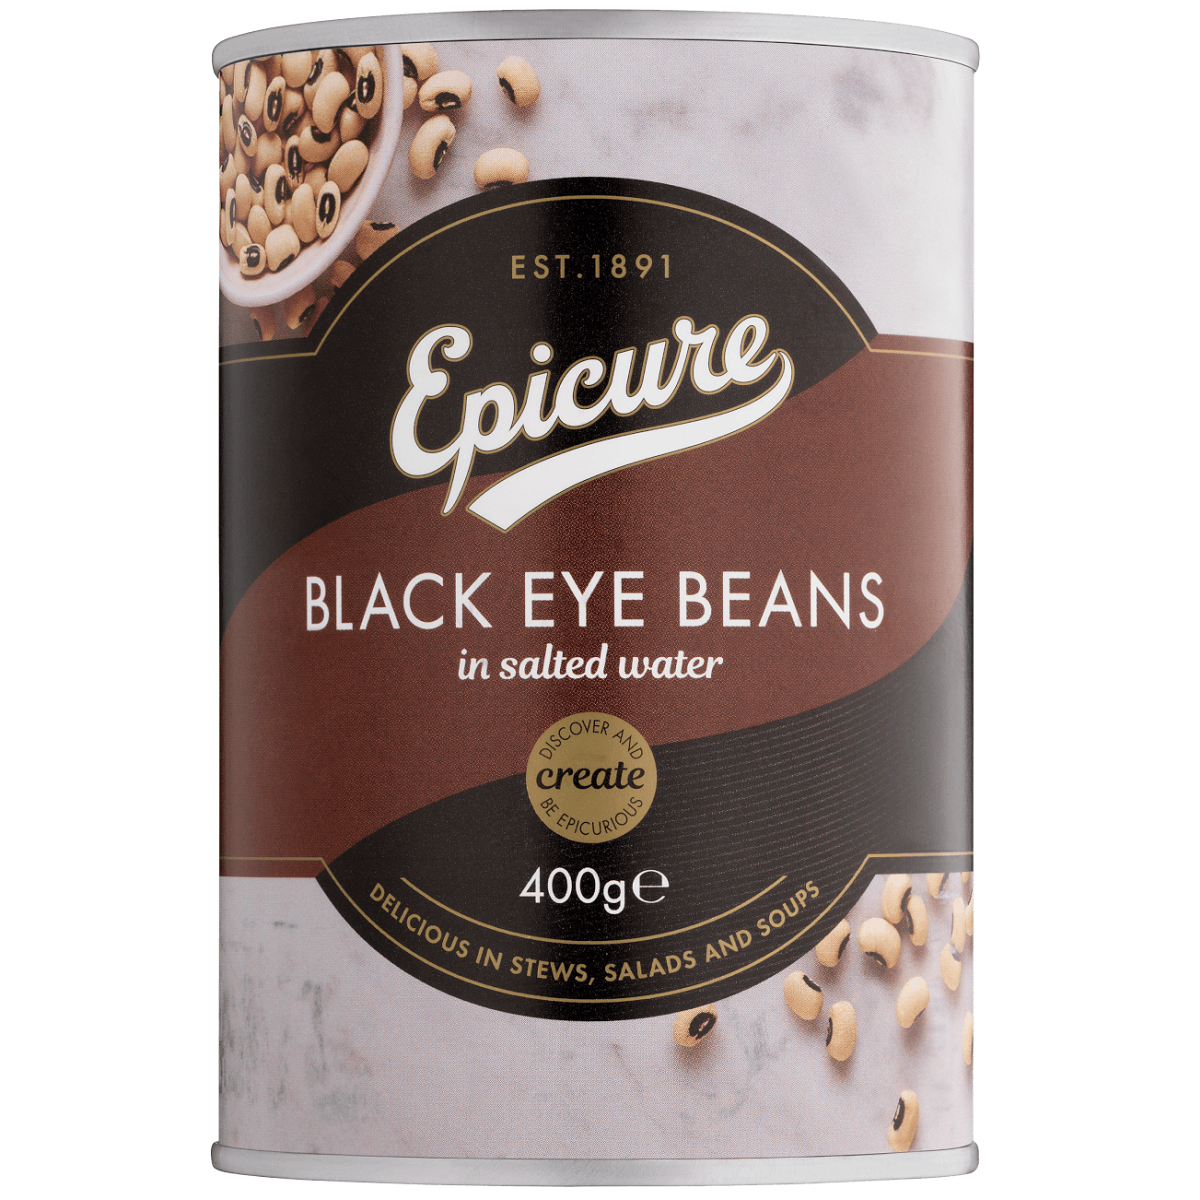 Epicure Black Eye Beans in salted water 400g